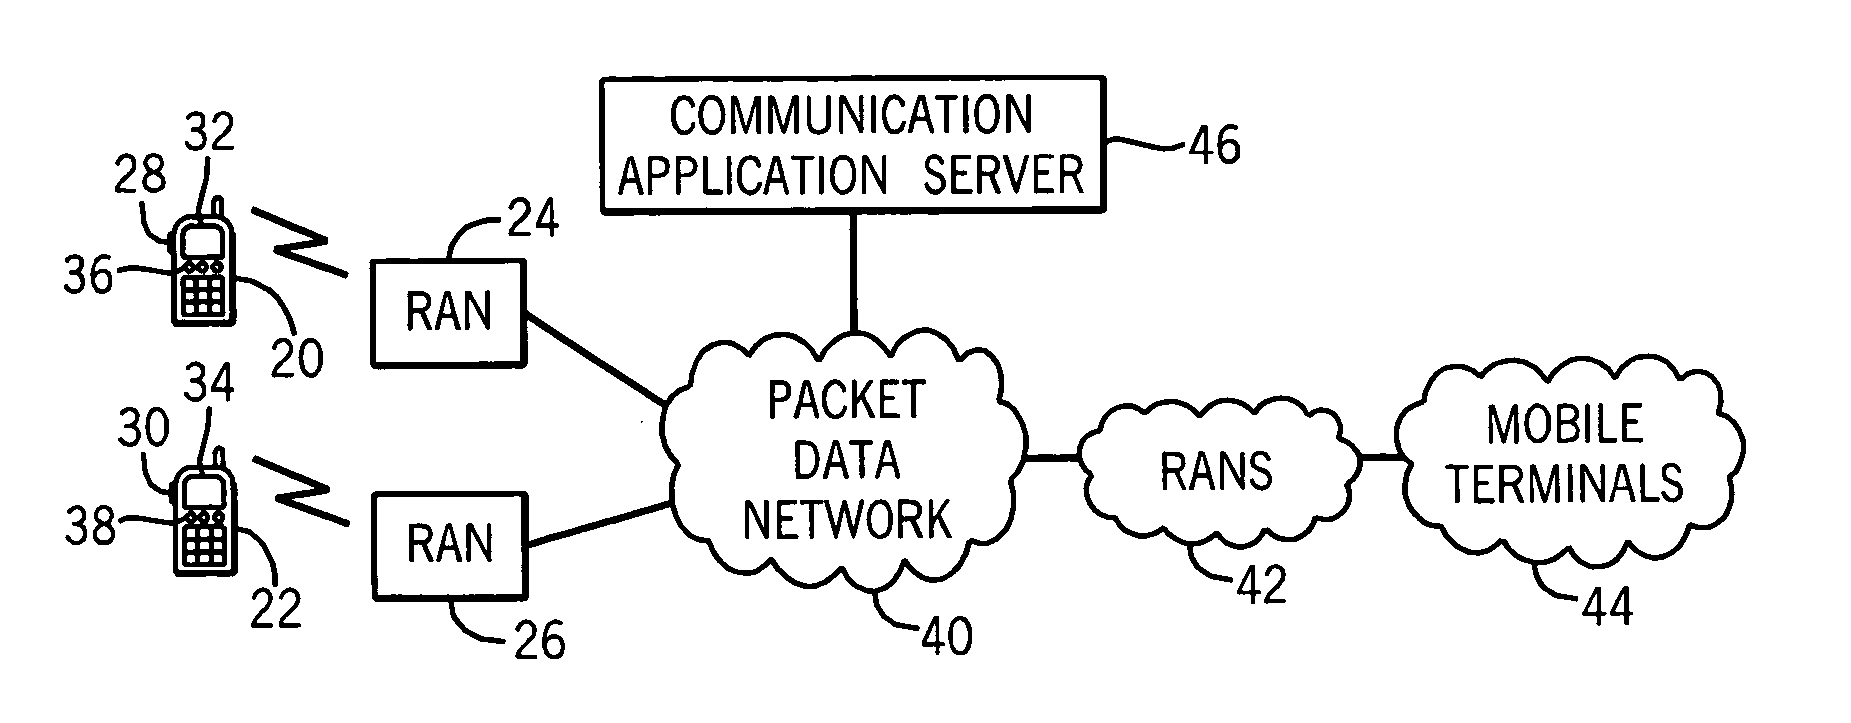 Incoming call management in a push-to-talk communication system